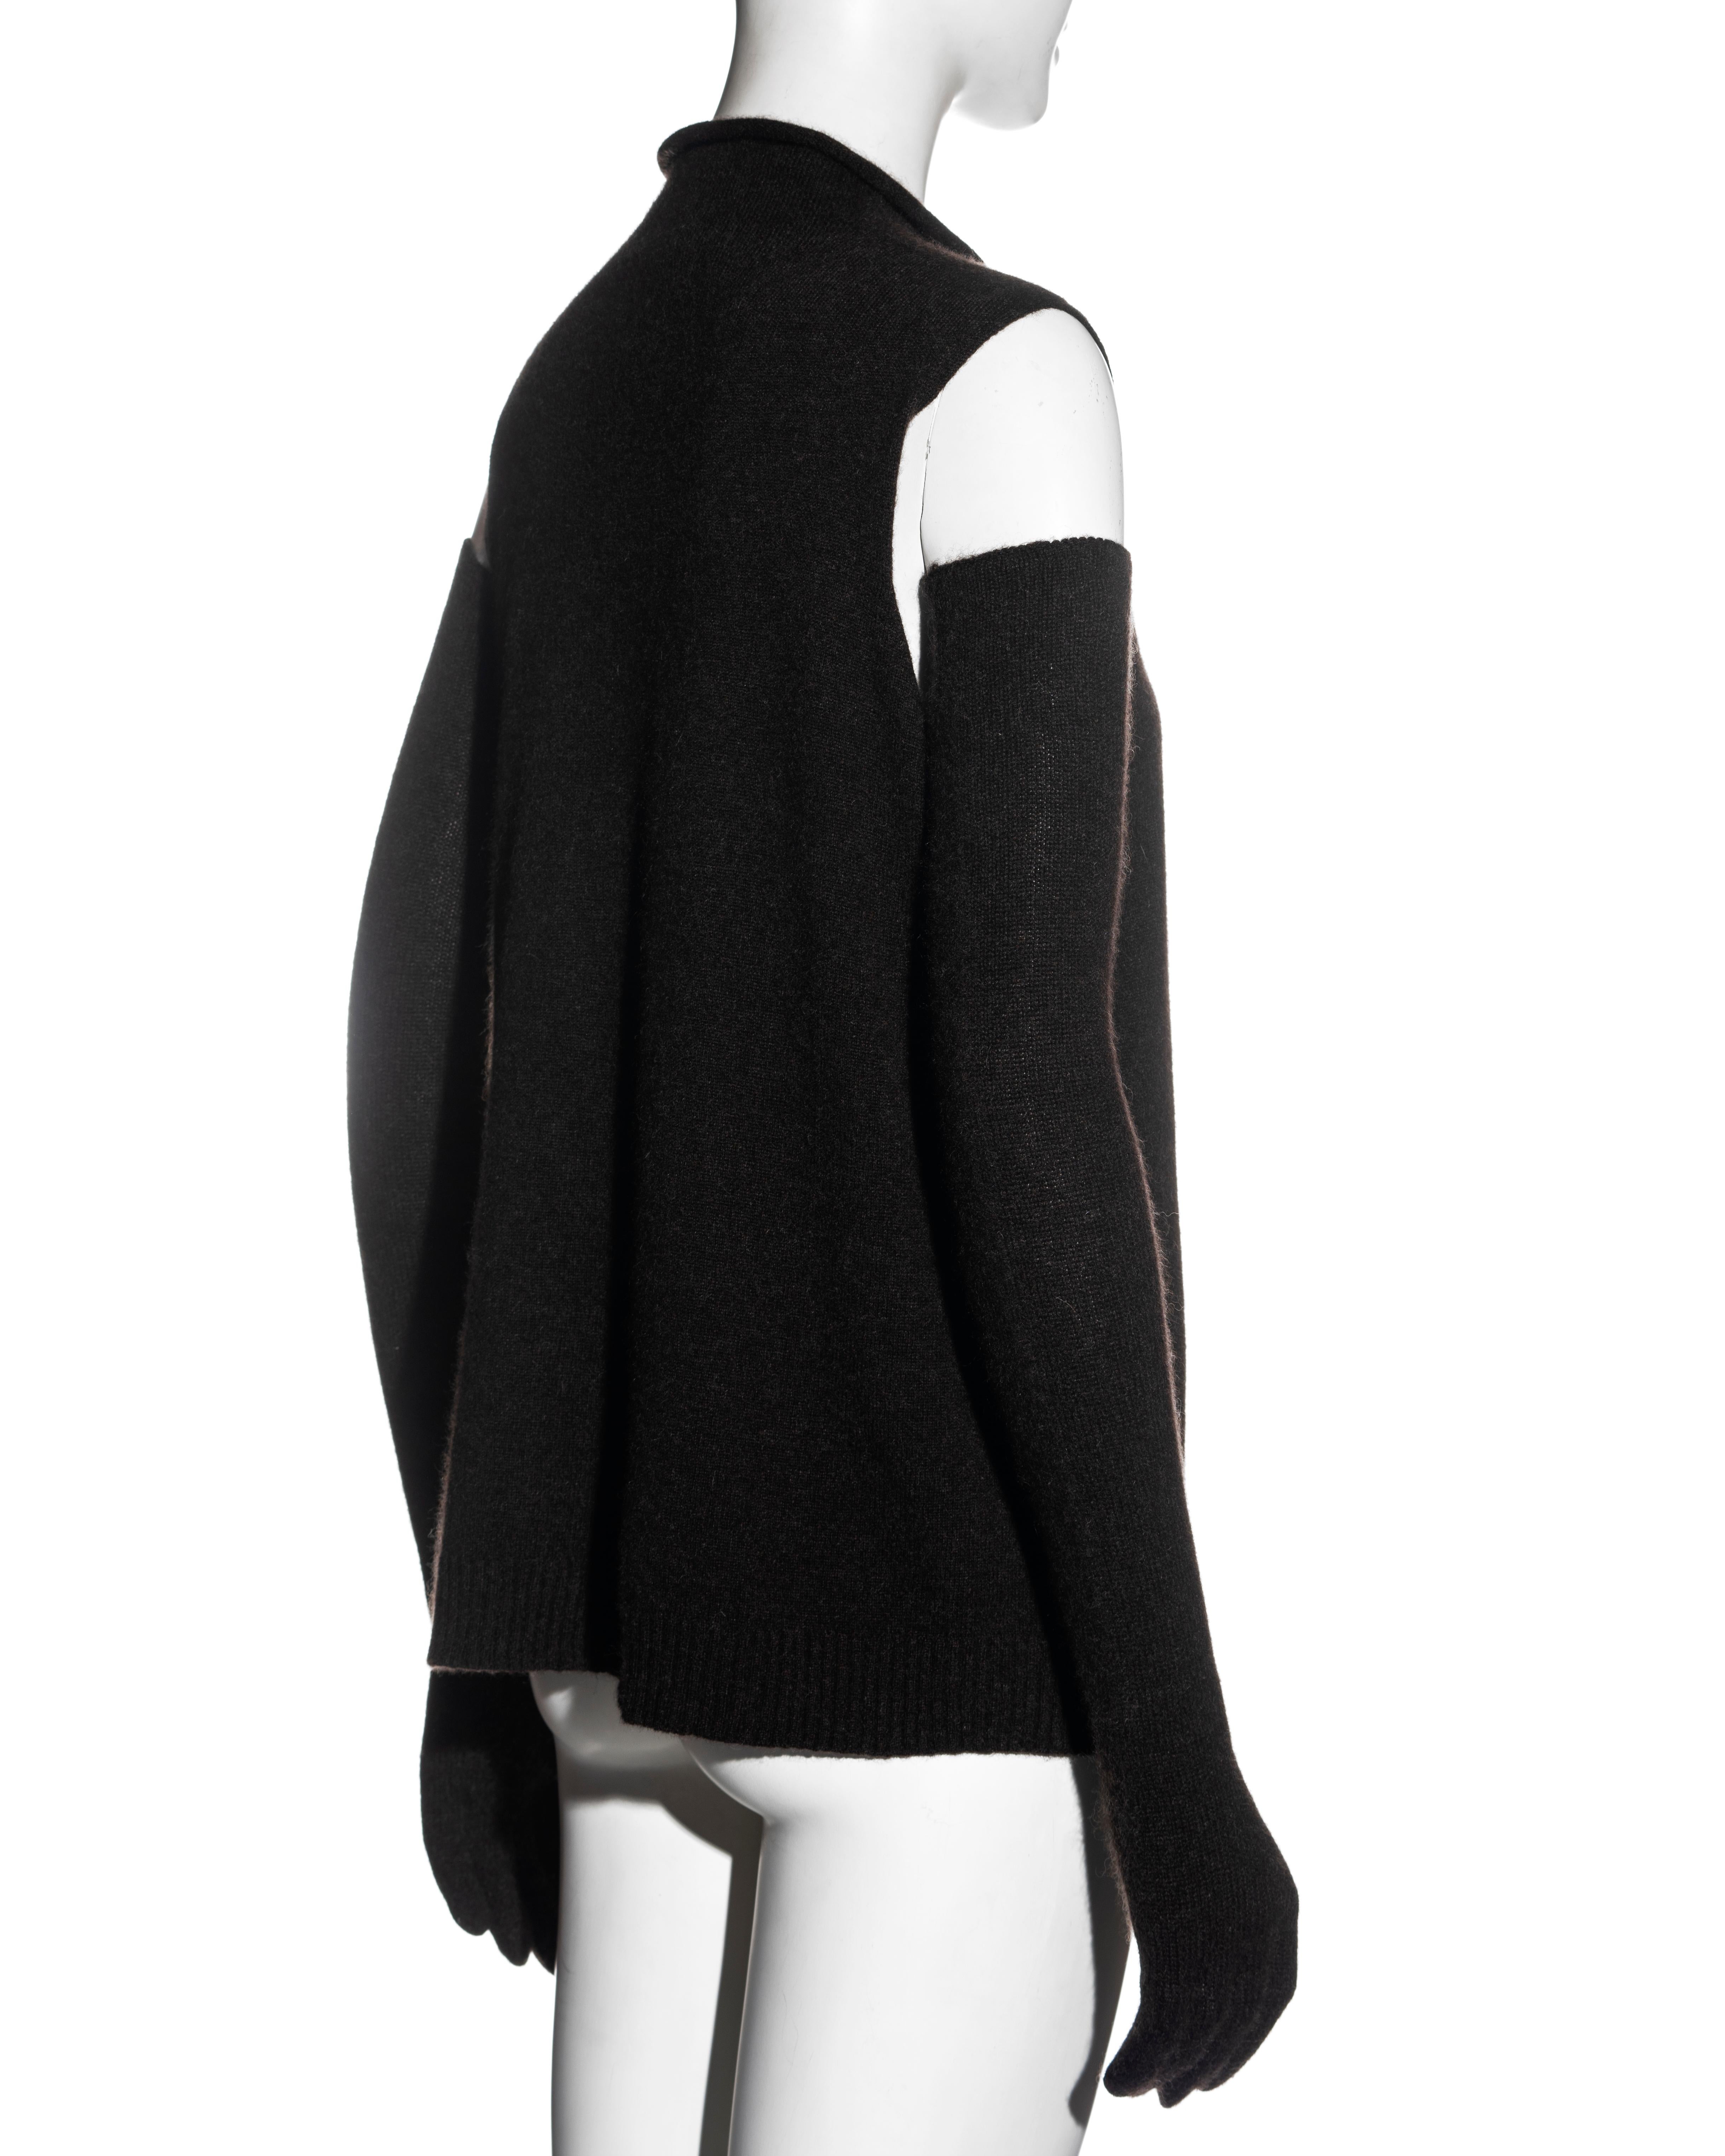 Hermes by Martin Margiela shearling jacket and cashmere sweater set, fw ...